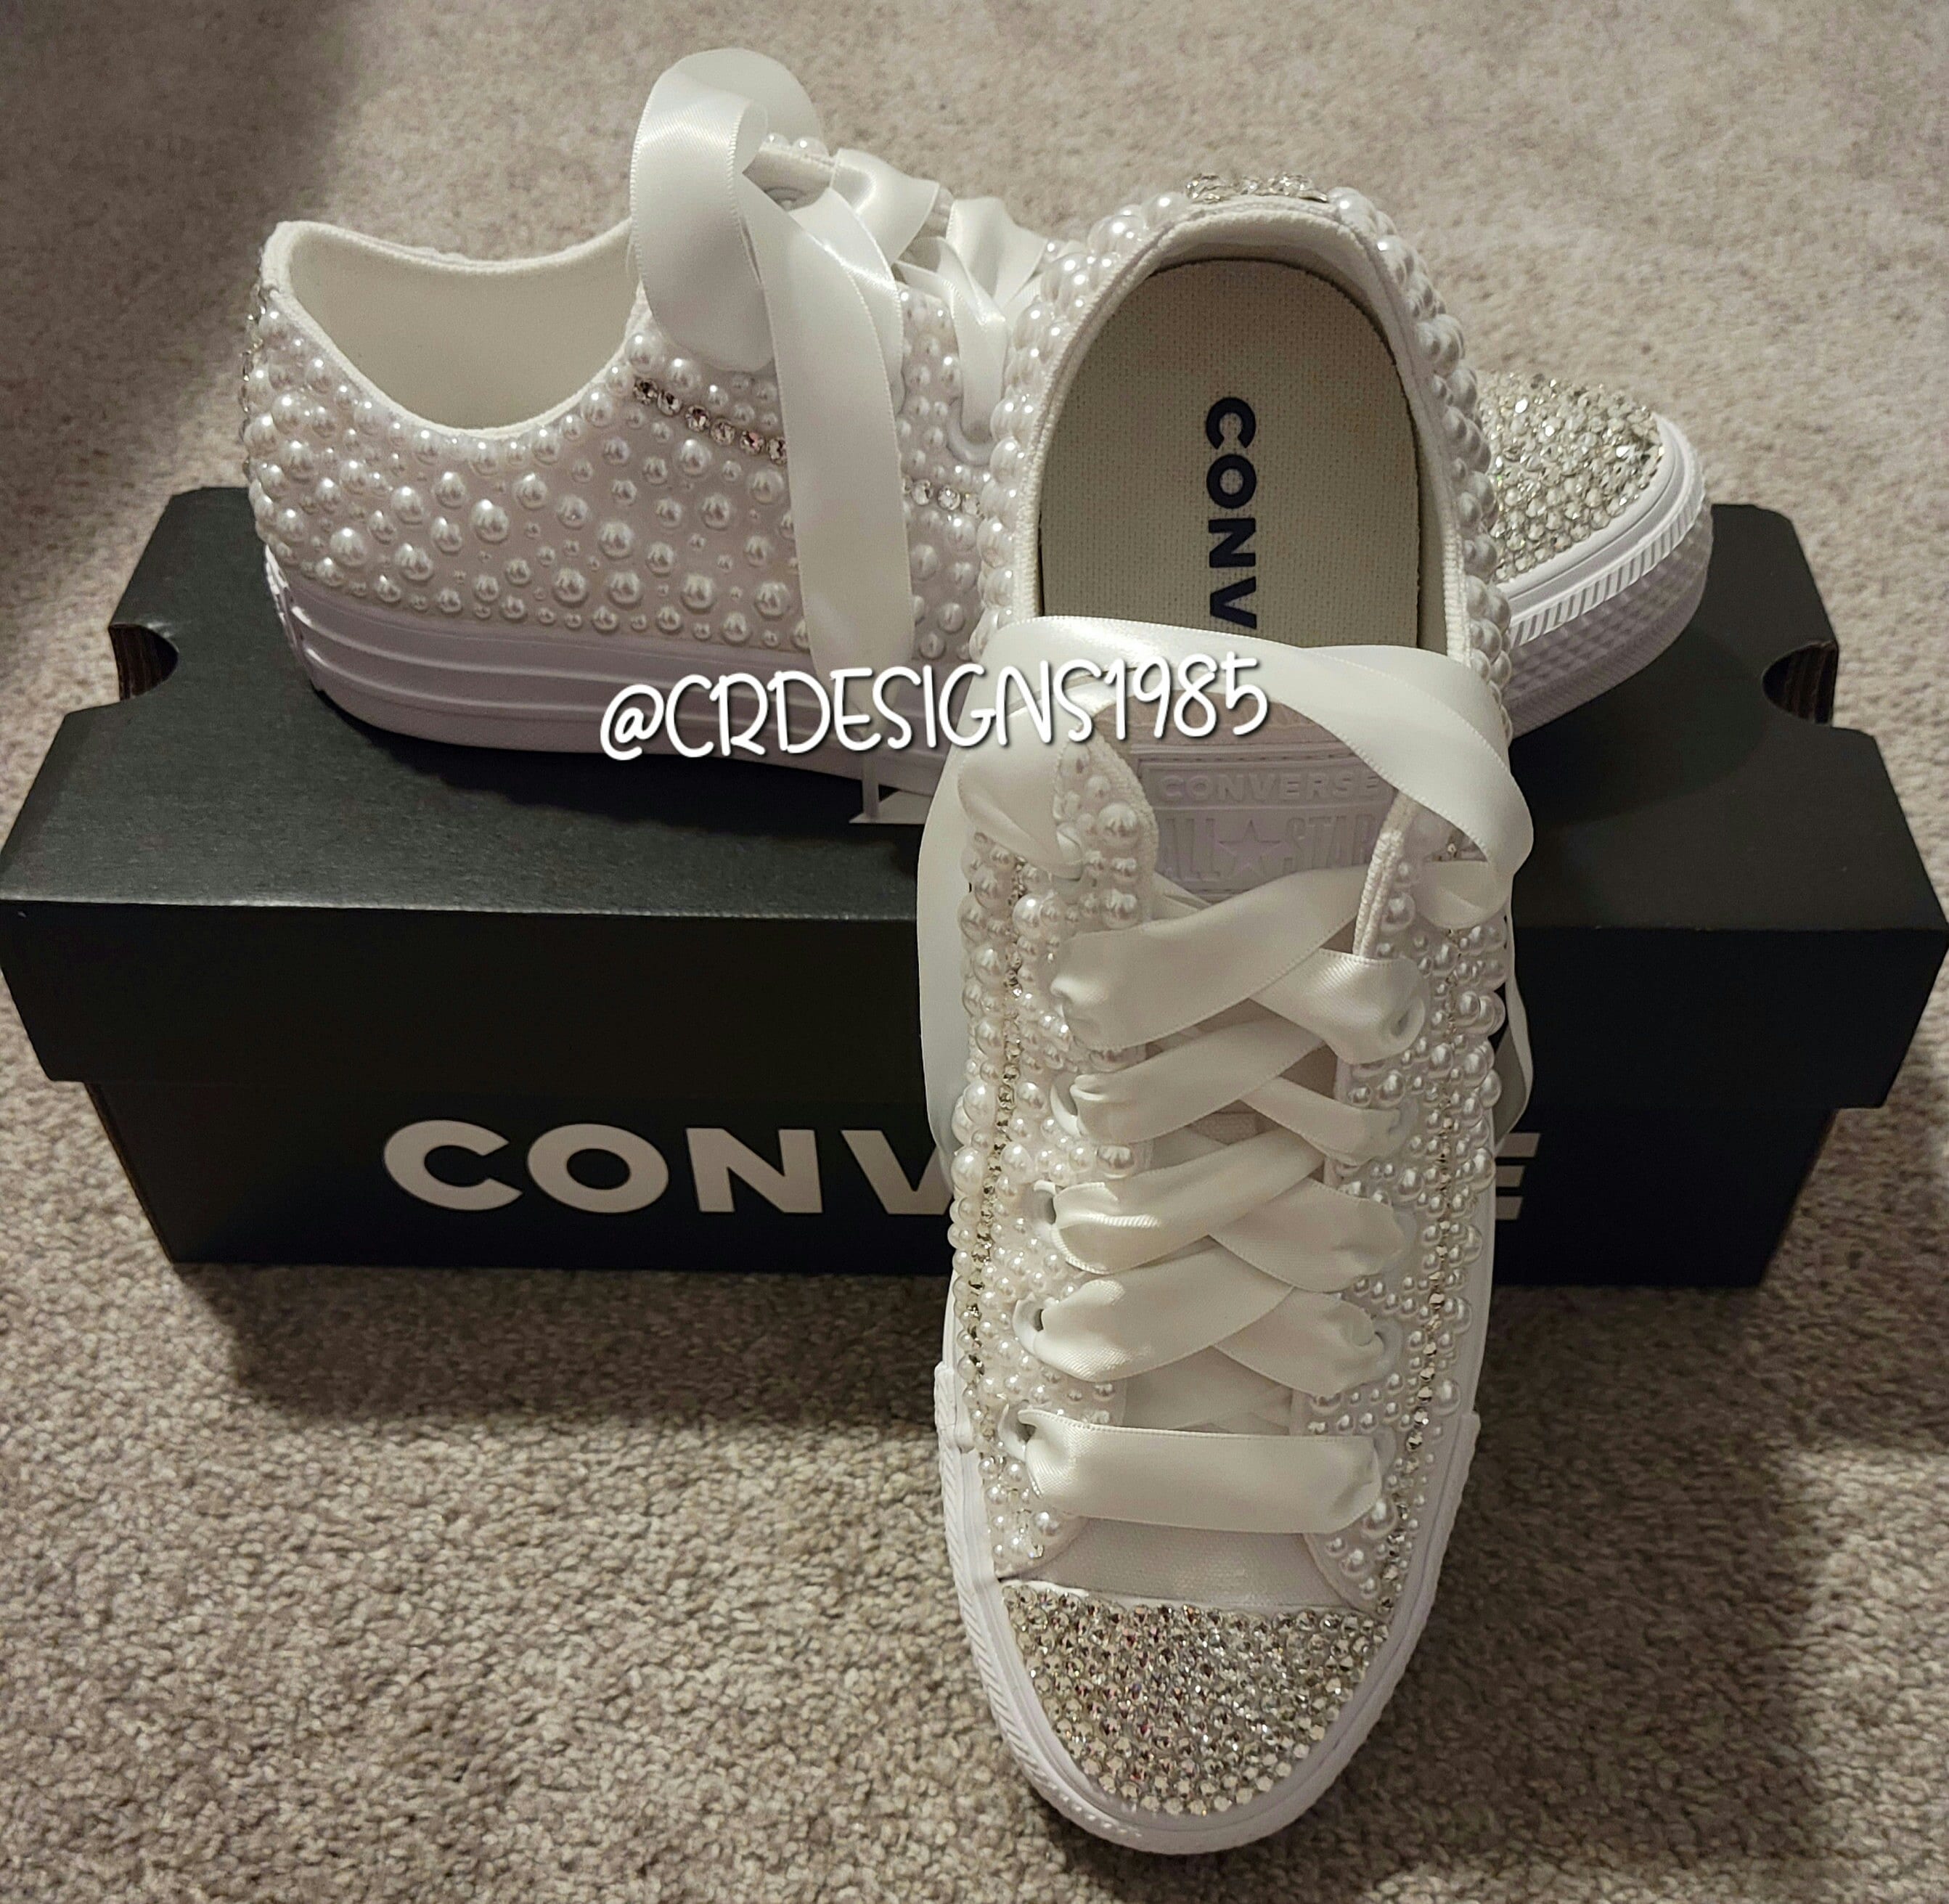 Professional or College Tennis Shoes, converse, wedding, quinceanera, bling  shoes rhinestoned on one side.